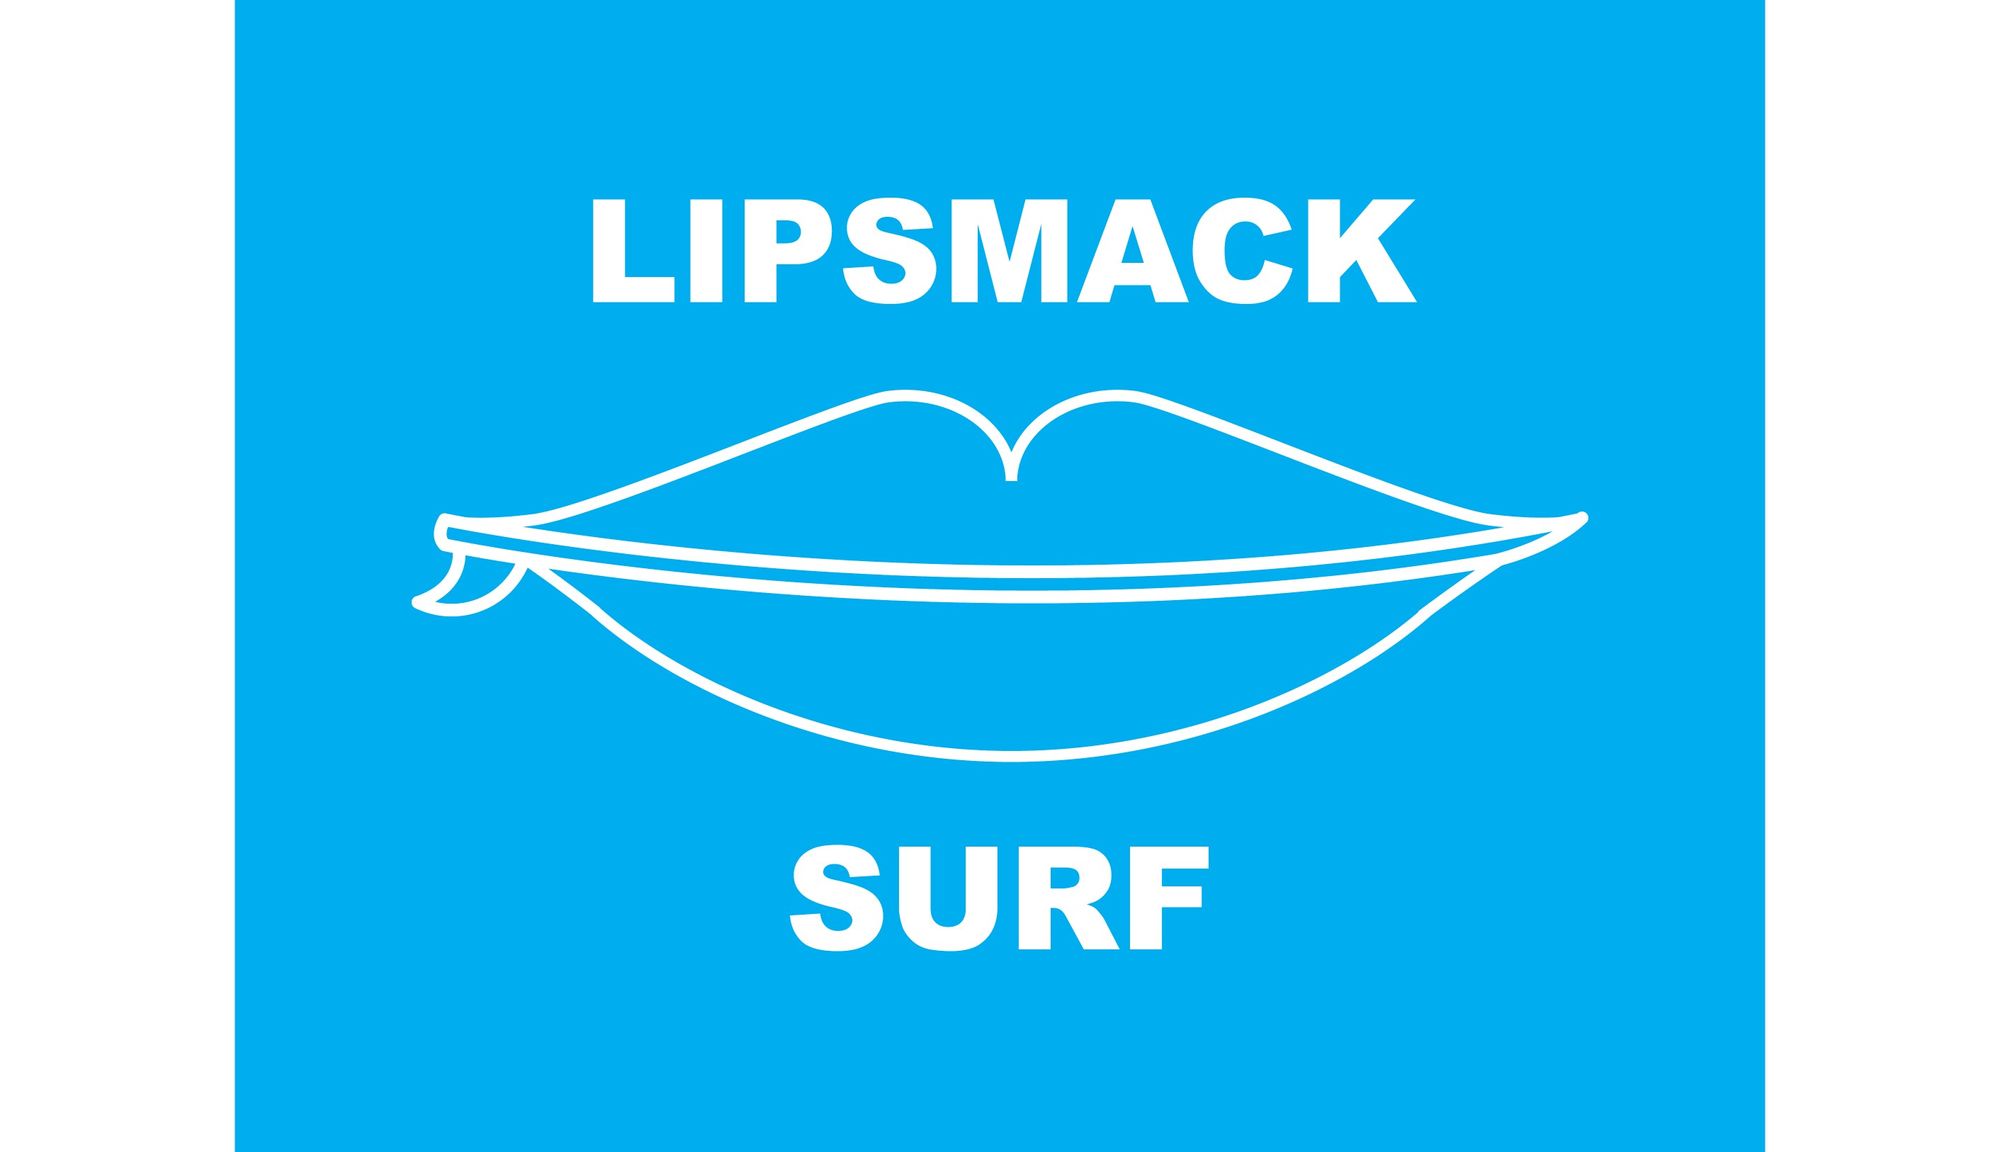 Catch Some Waves - Lipsmack Surf